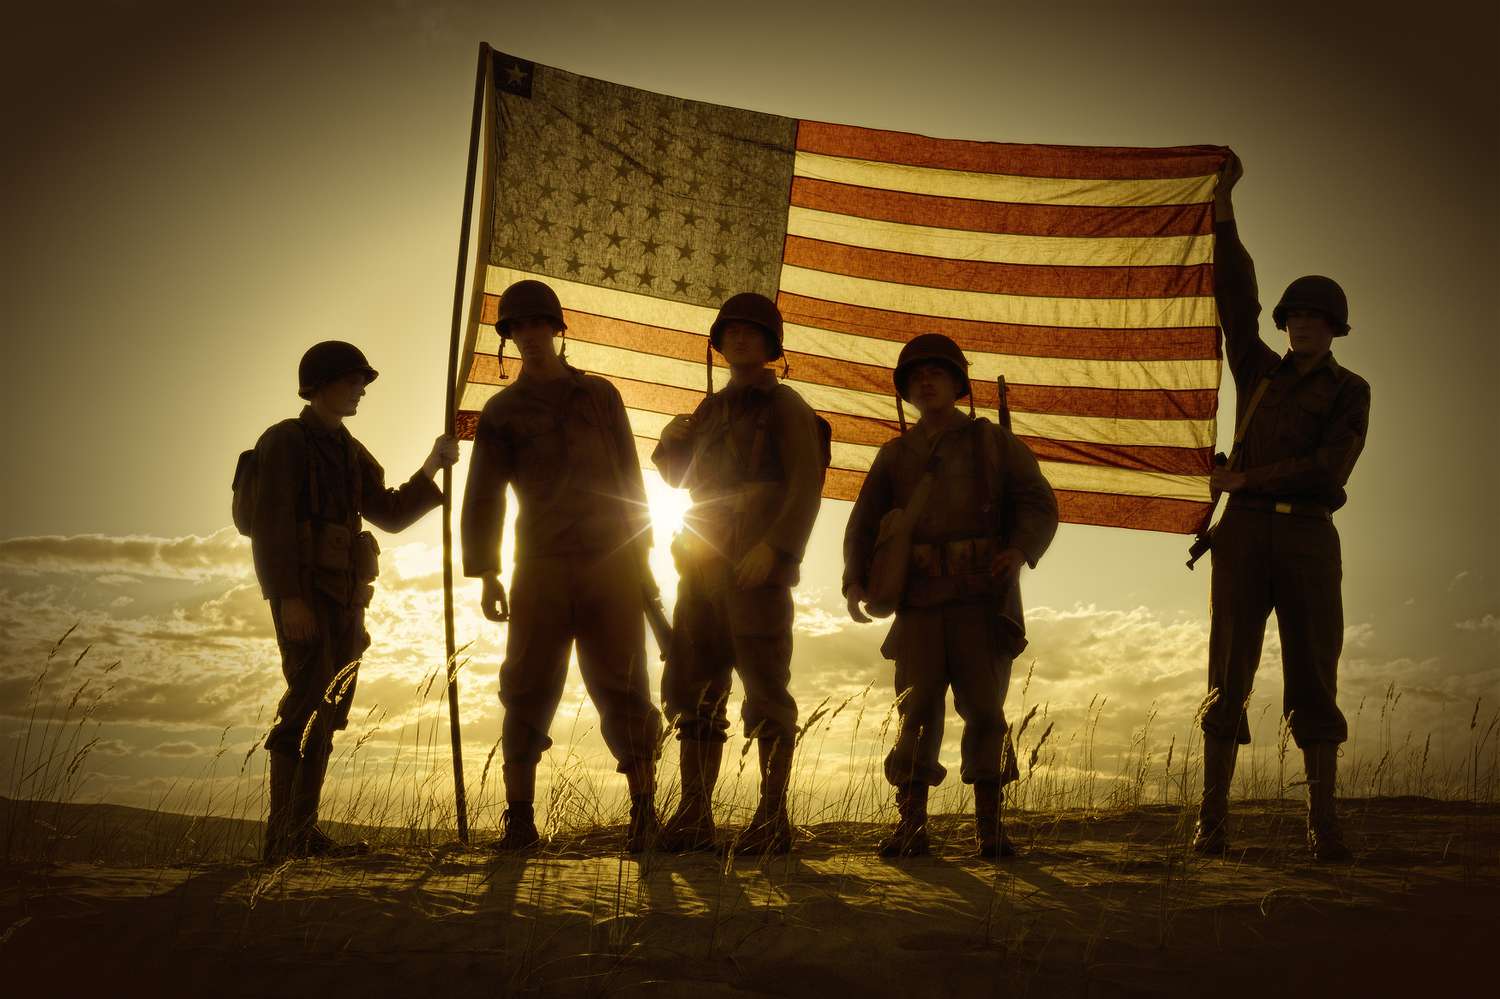 silhouette-of-soldiers-with-american-flag-186546665-5c7ac4ff46e0fb0001edc832.jpg